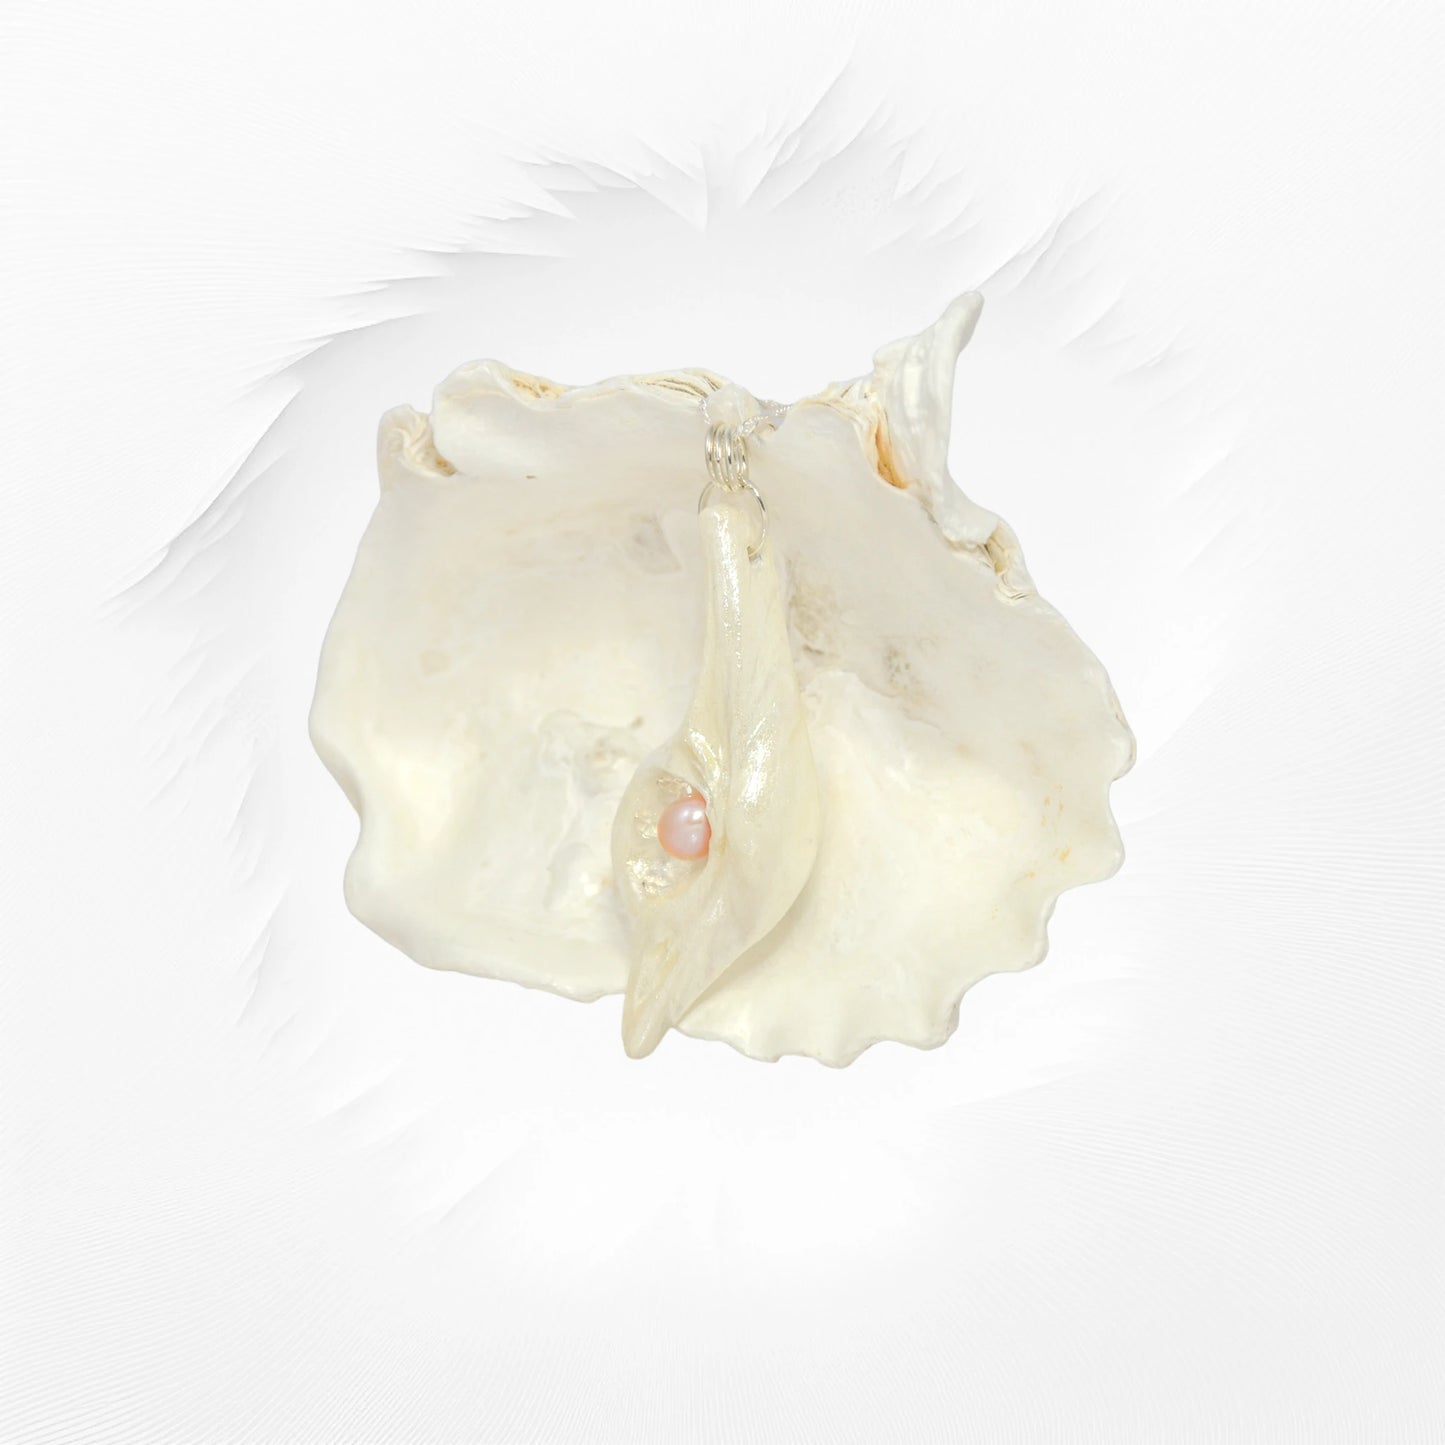 The pendant champagne on ice is shown hanging from a larger shell with white background.